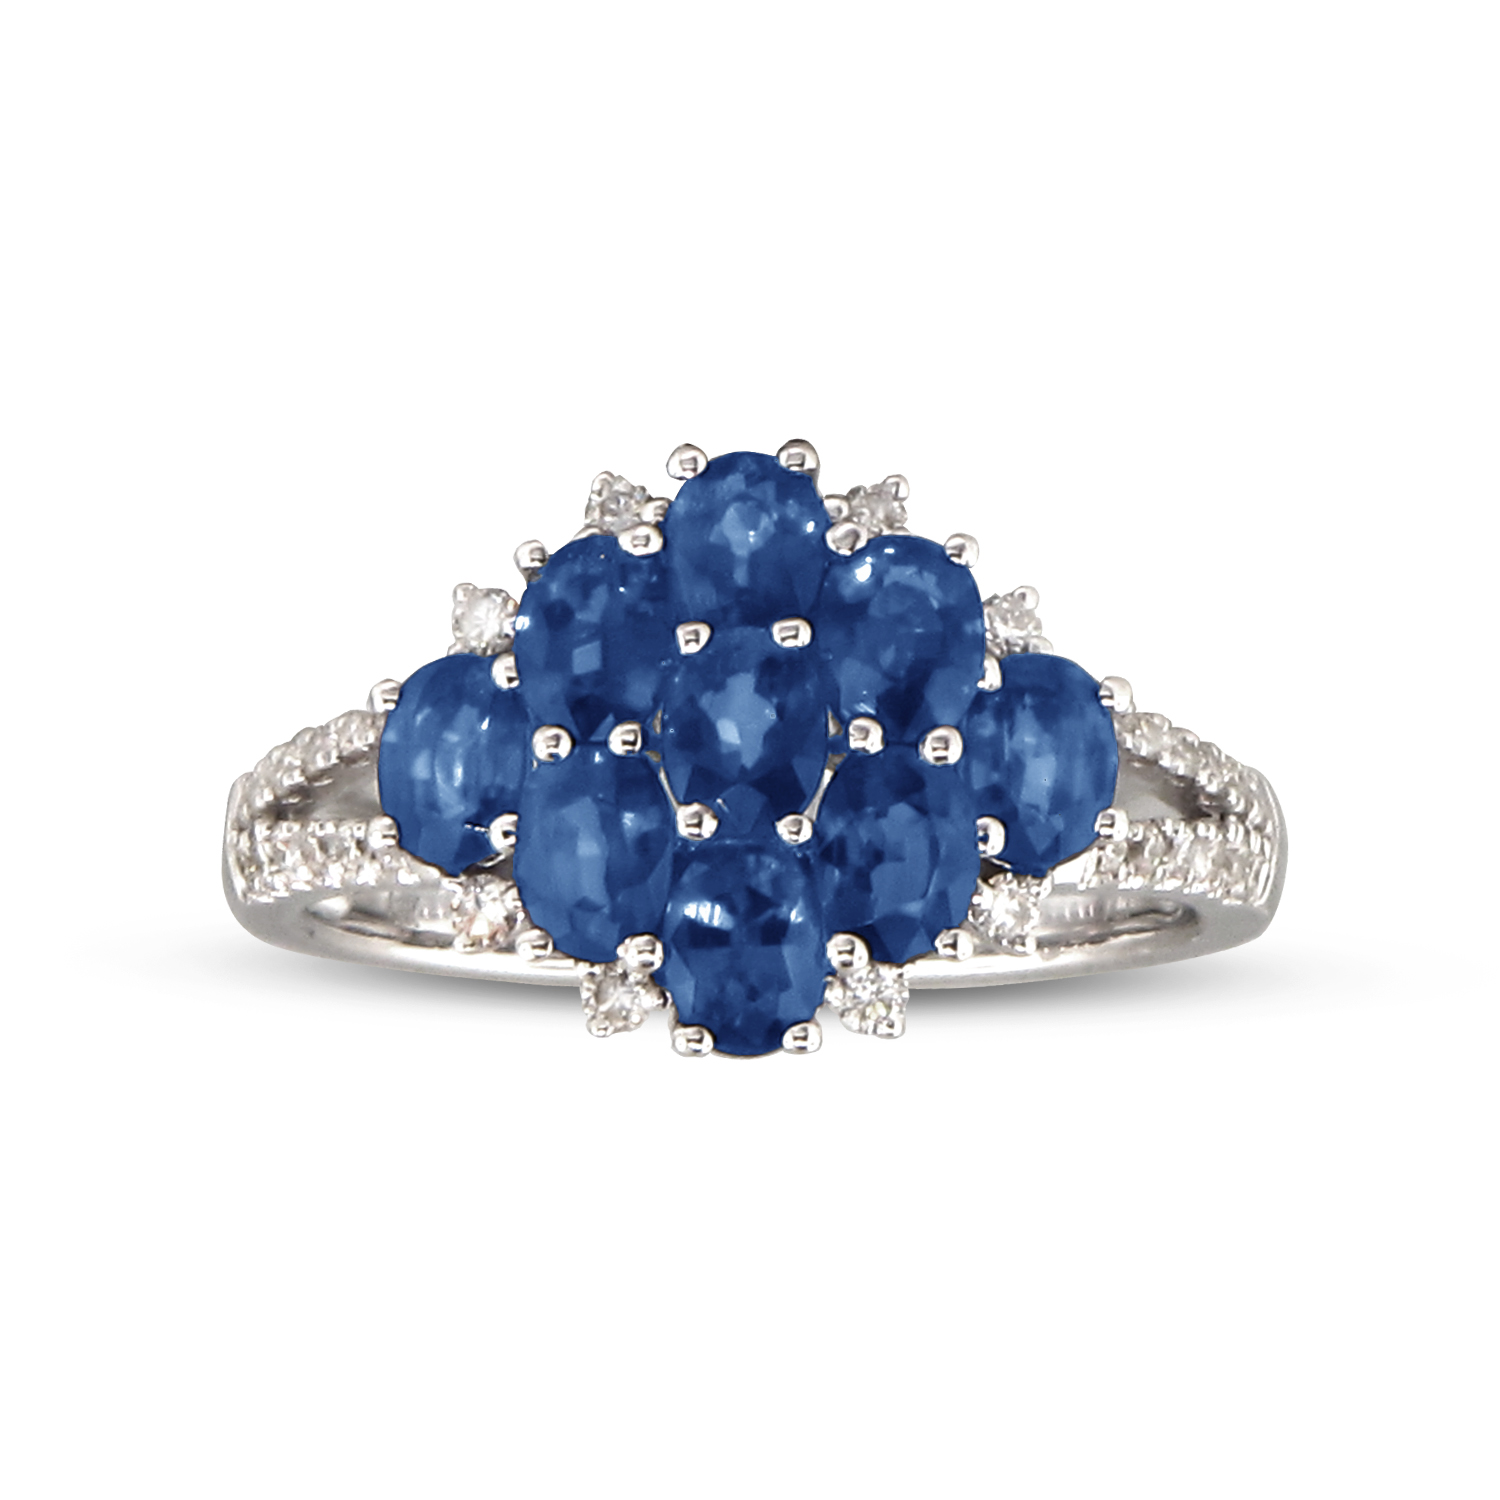 View 0.24ctw Diamond and Sapphire Fashion Ring in 14k WG